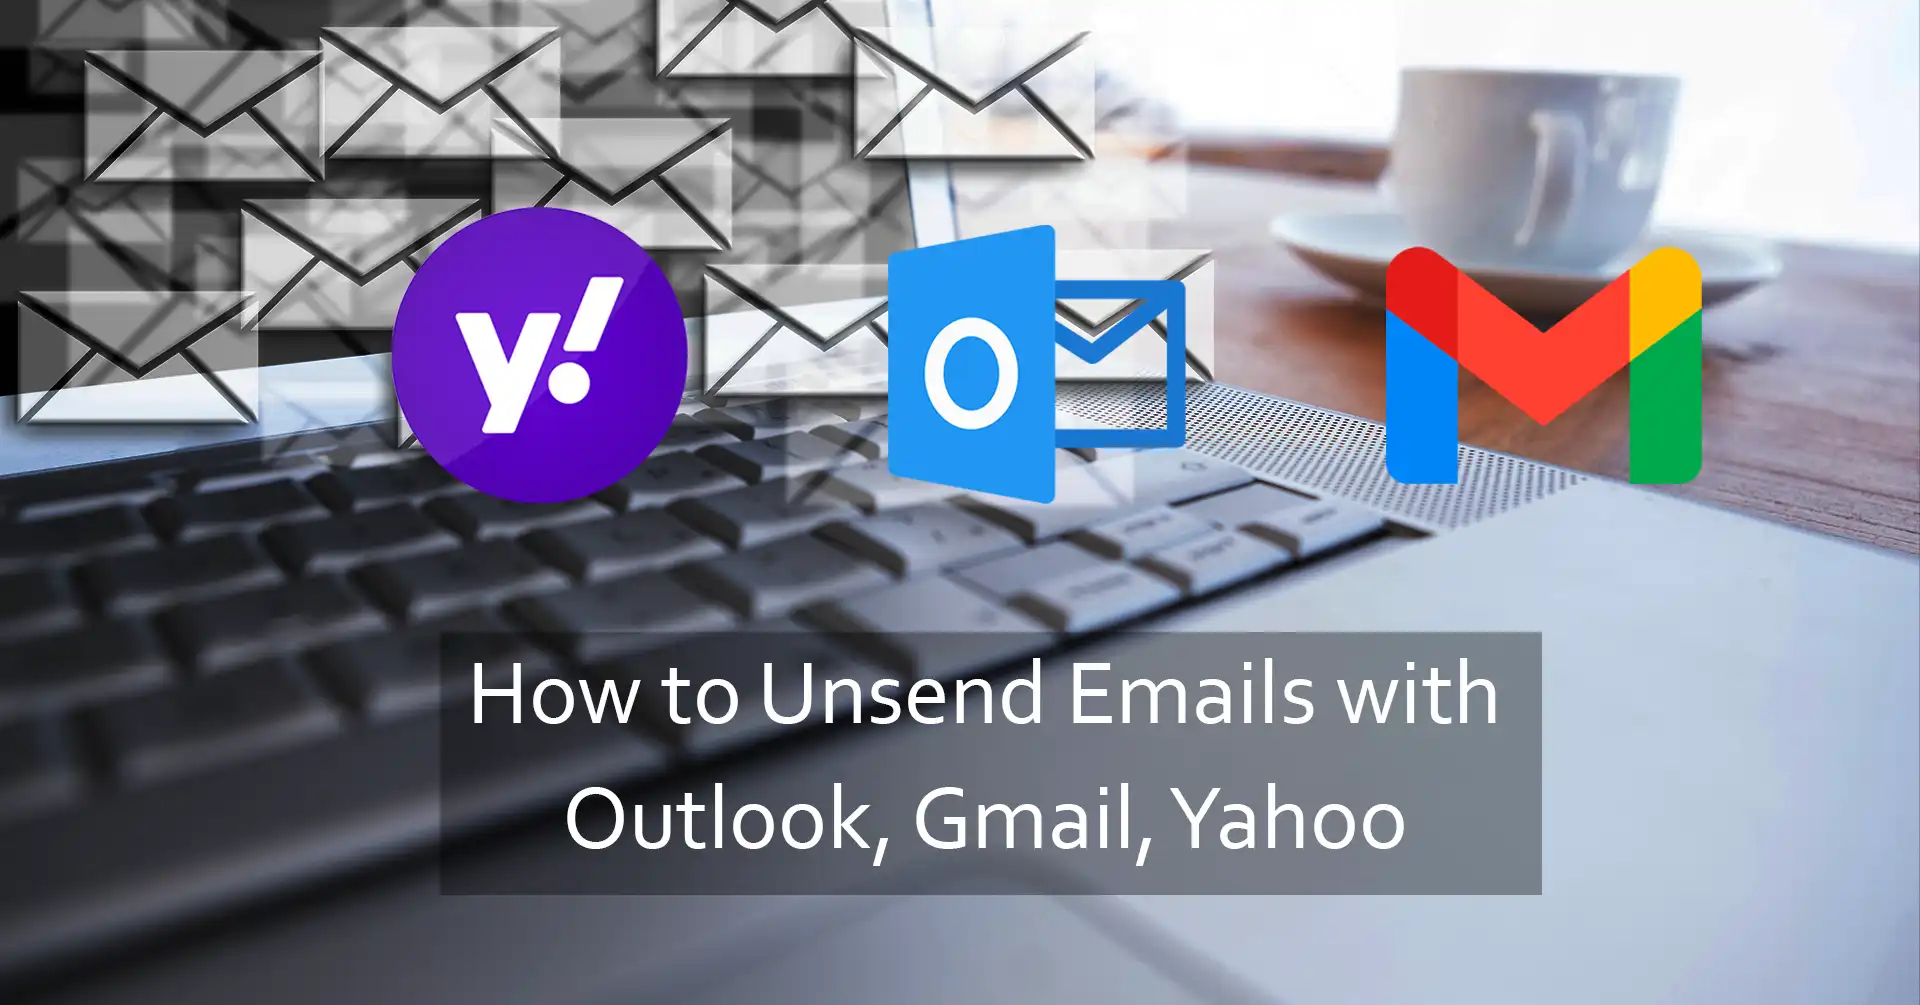 Unsend Email Outlook & Avoid Email Mishaps! IEMLabs Blog